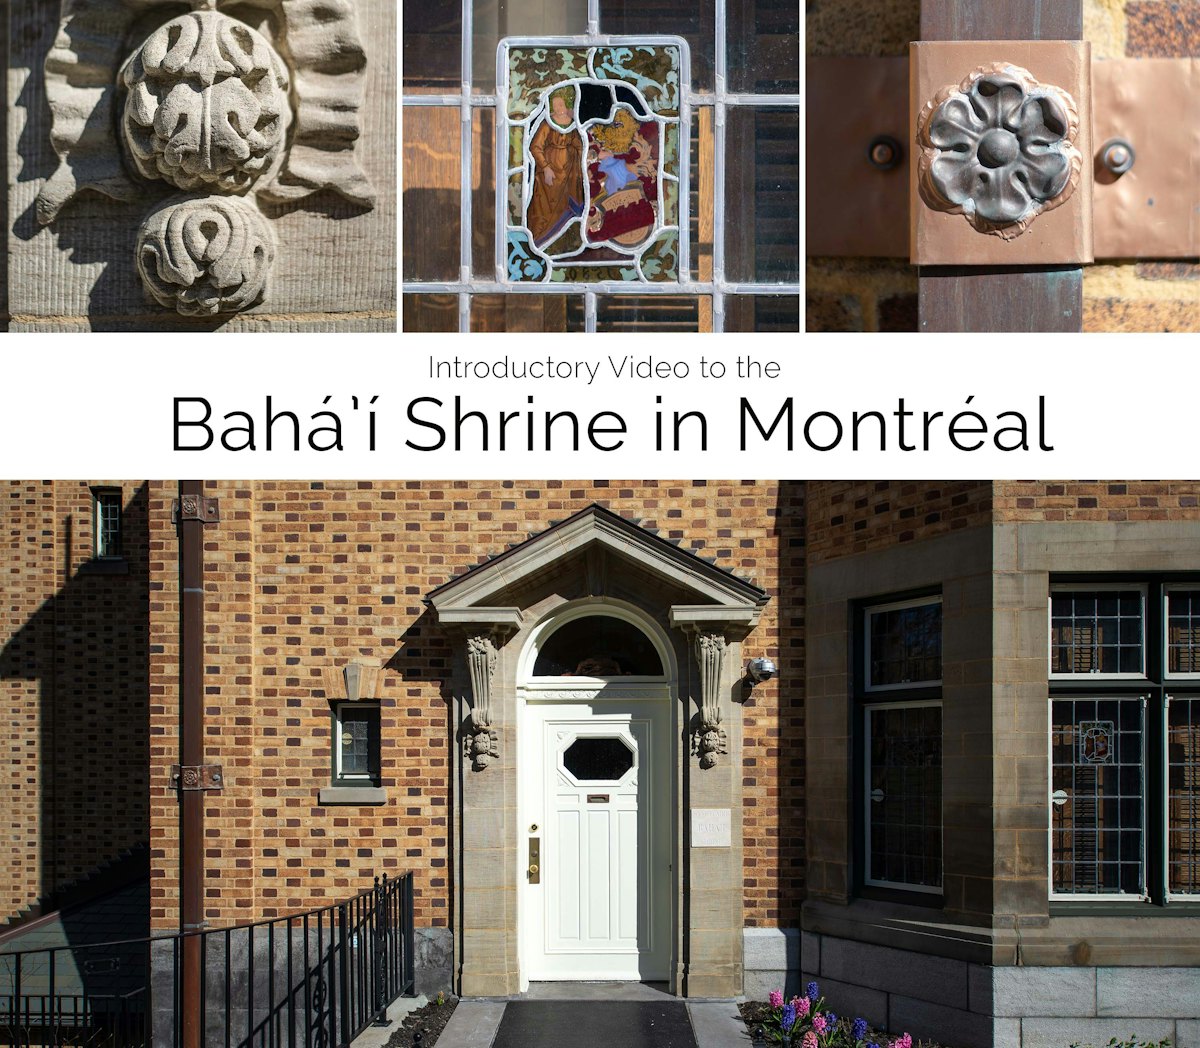 During His ten-day visit to Montreal, Canada, in 1912, ‘Abdu’l-Bahá stayed in the home of May and William Sutherland Maxwell for four days where He gave three talks to public audiences on the themes of spiritual education and the human soul. This film recounts the story of ‘Abdu’l-Bahá’s visit to that city and explains the significance of this home.